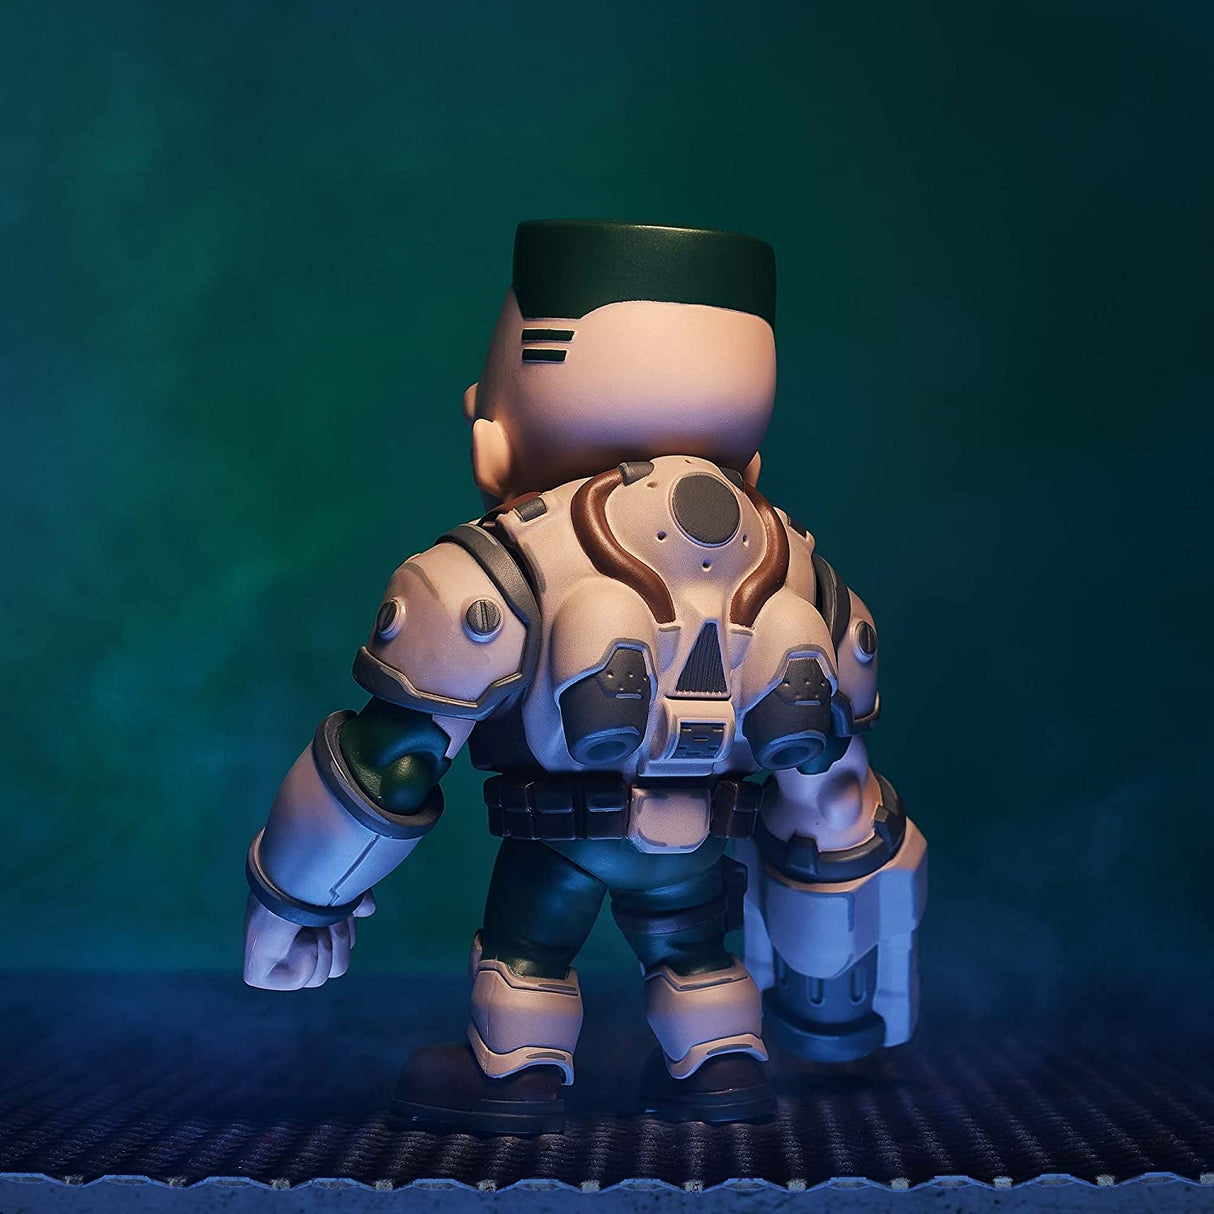 Official Doom Soldier | Collectible Figurine